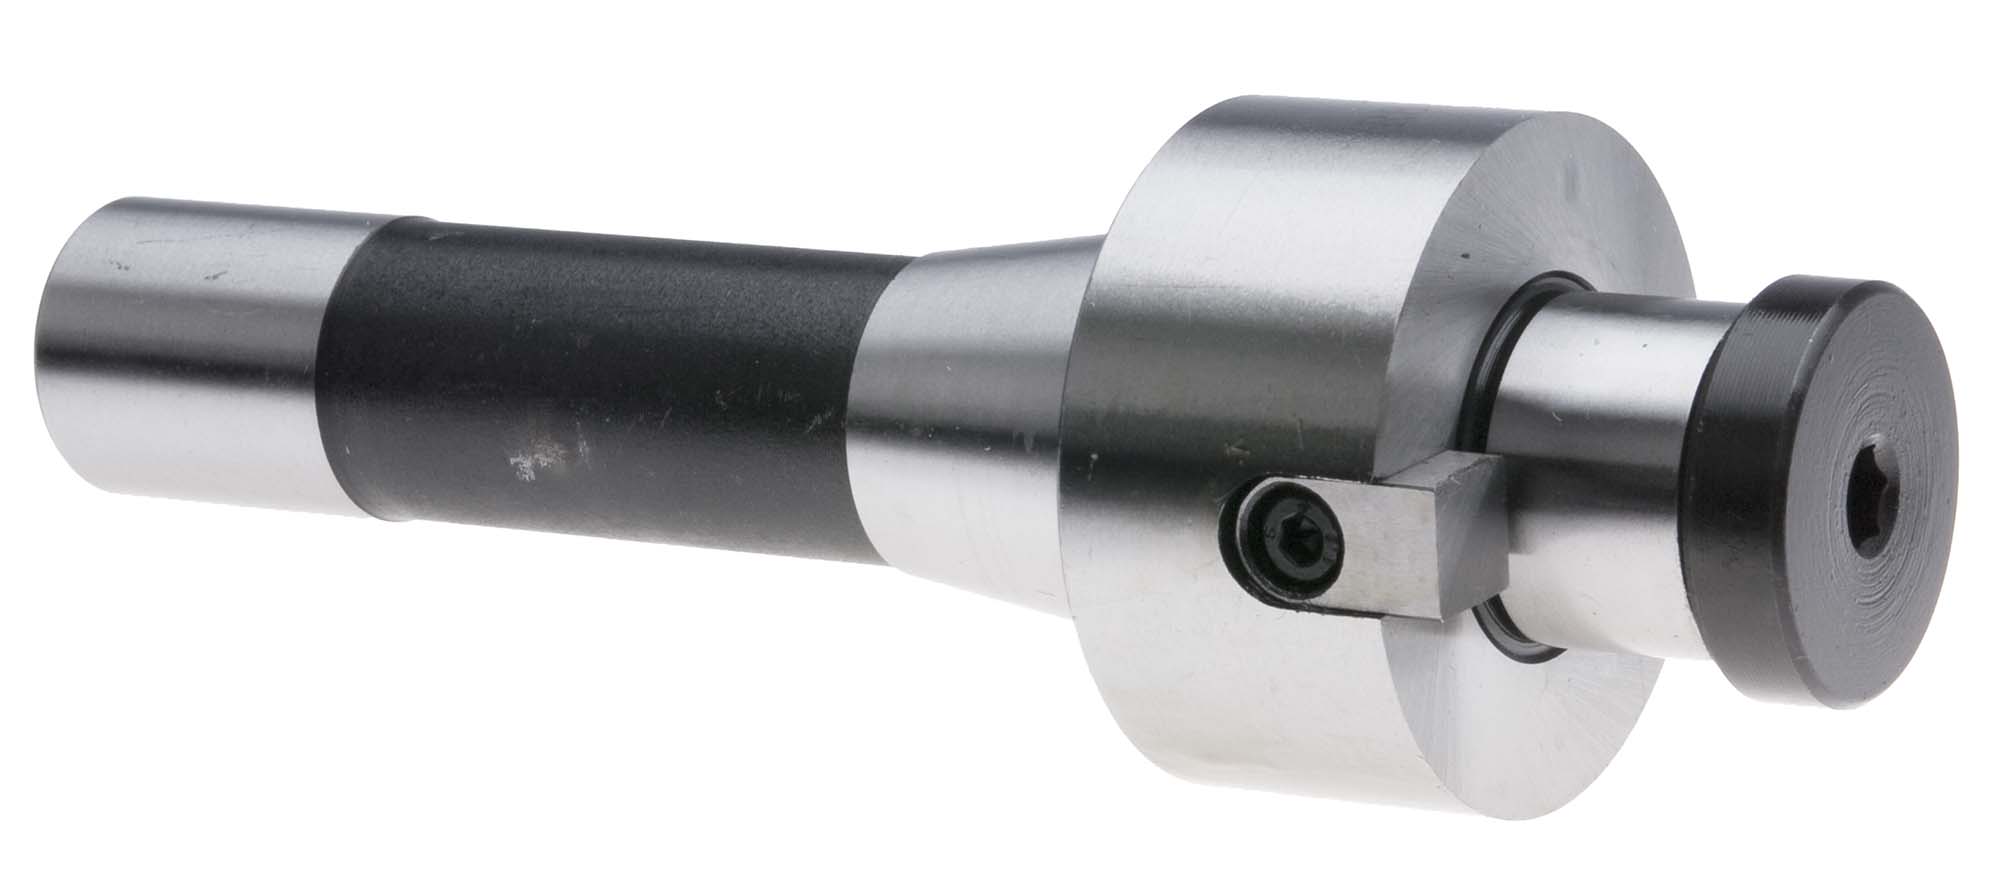 1/2" R8 Shell End Mill Arbor